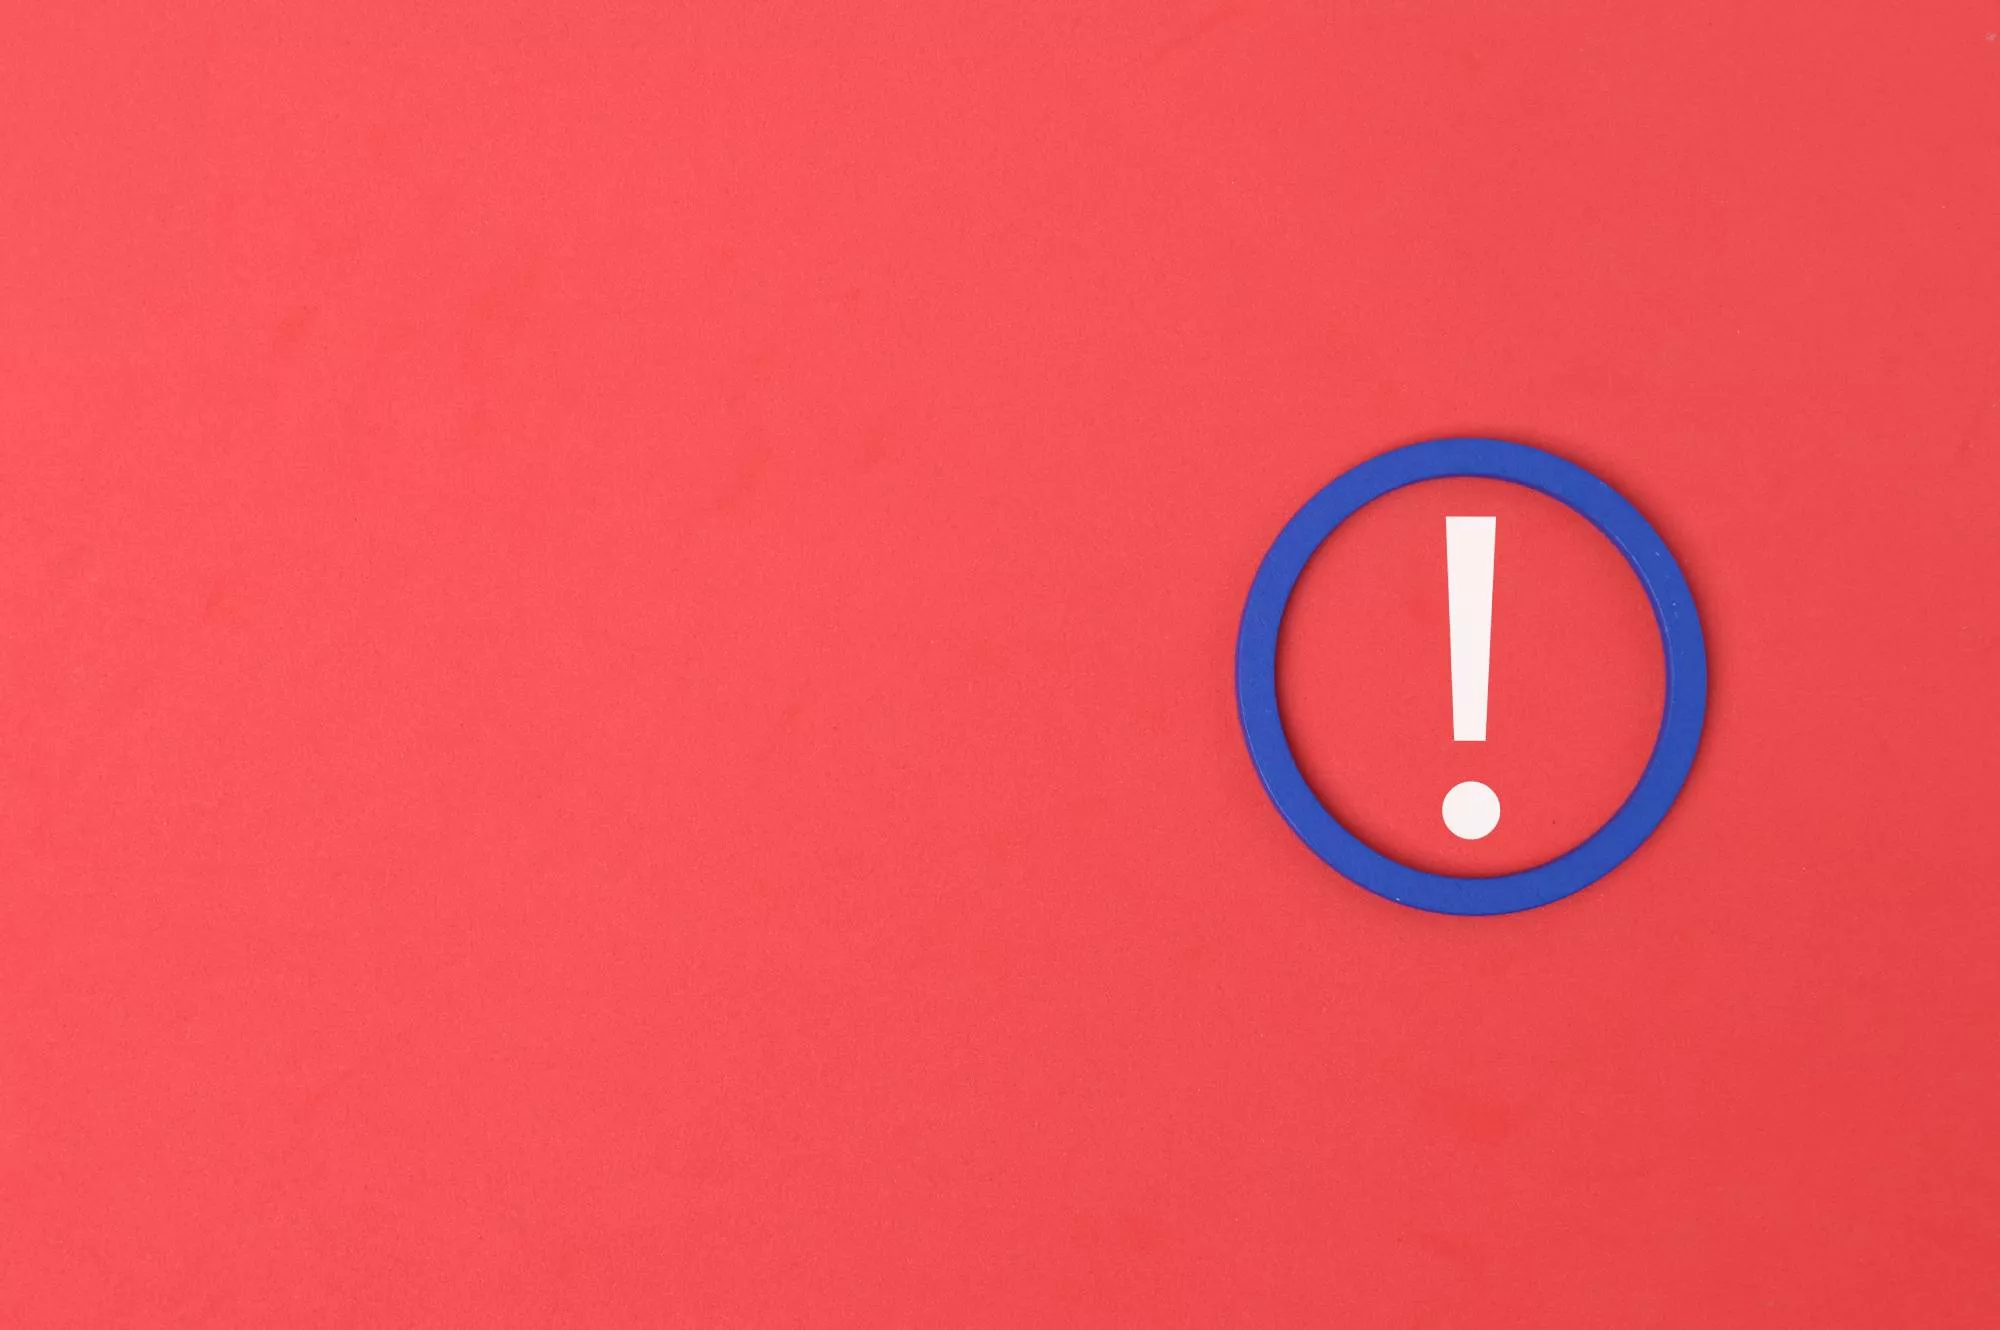 A white exclamation mark inside a purple circle on a red background to represent r83 ach return code.